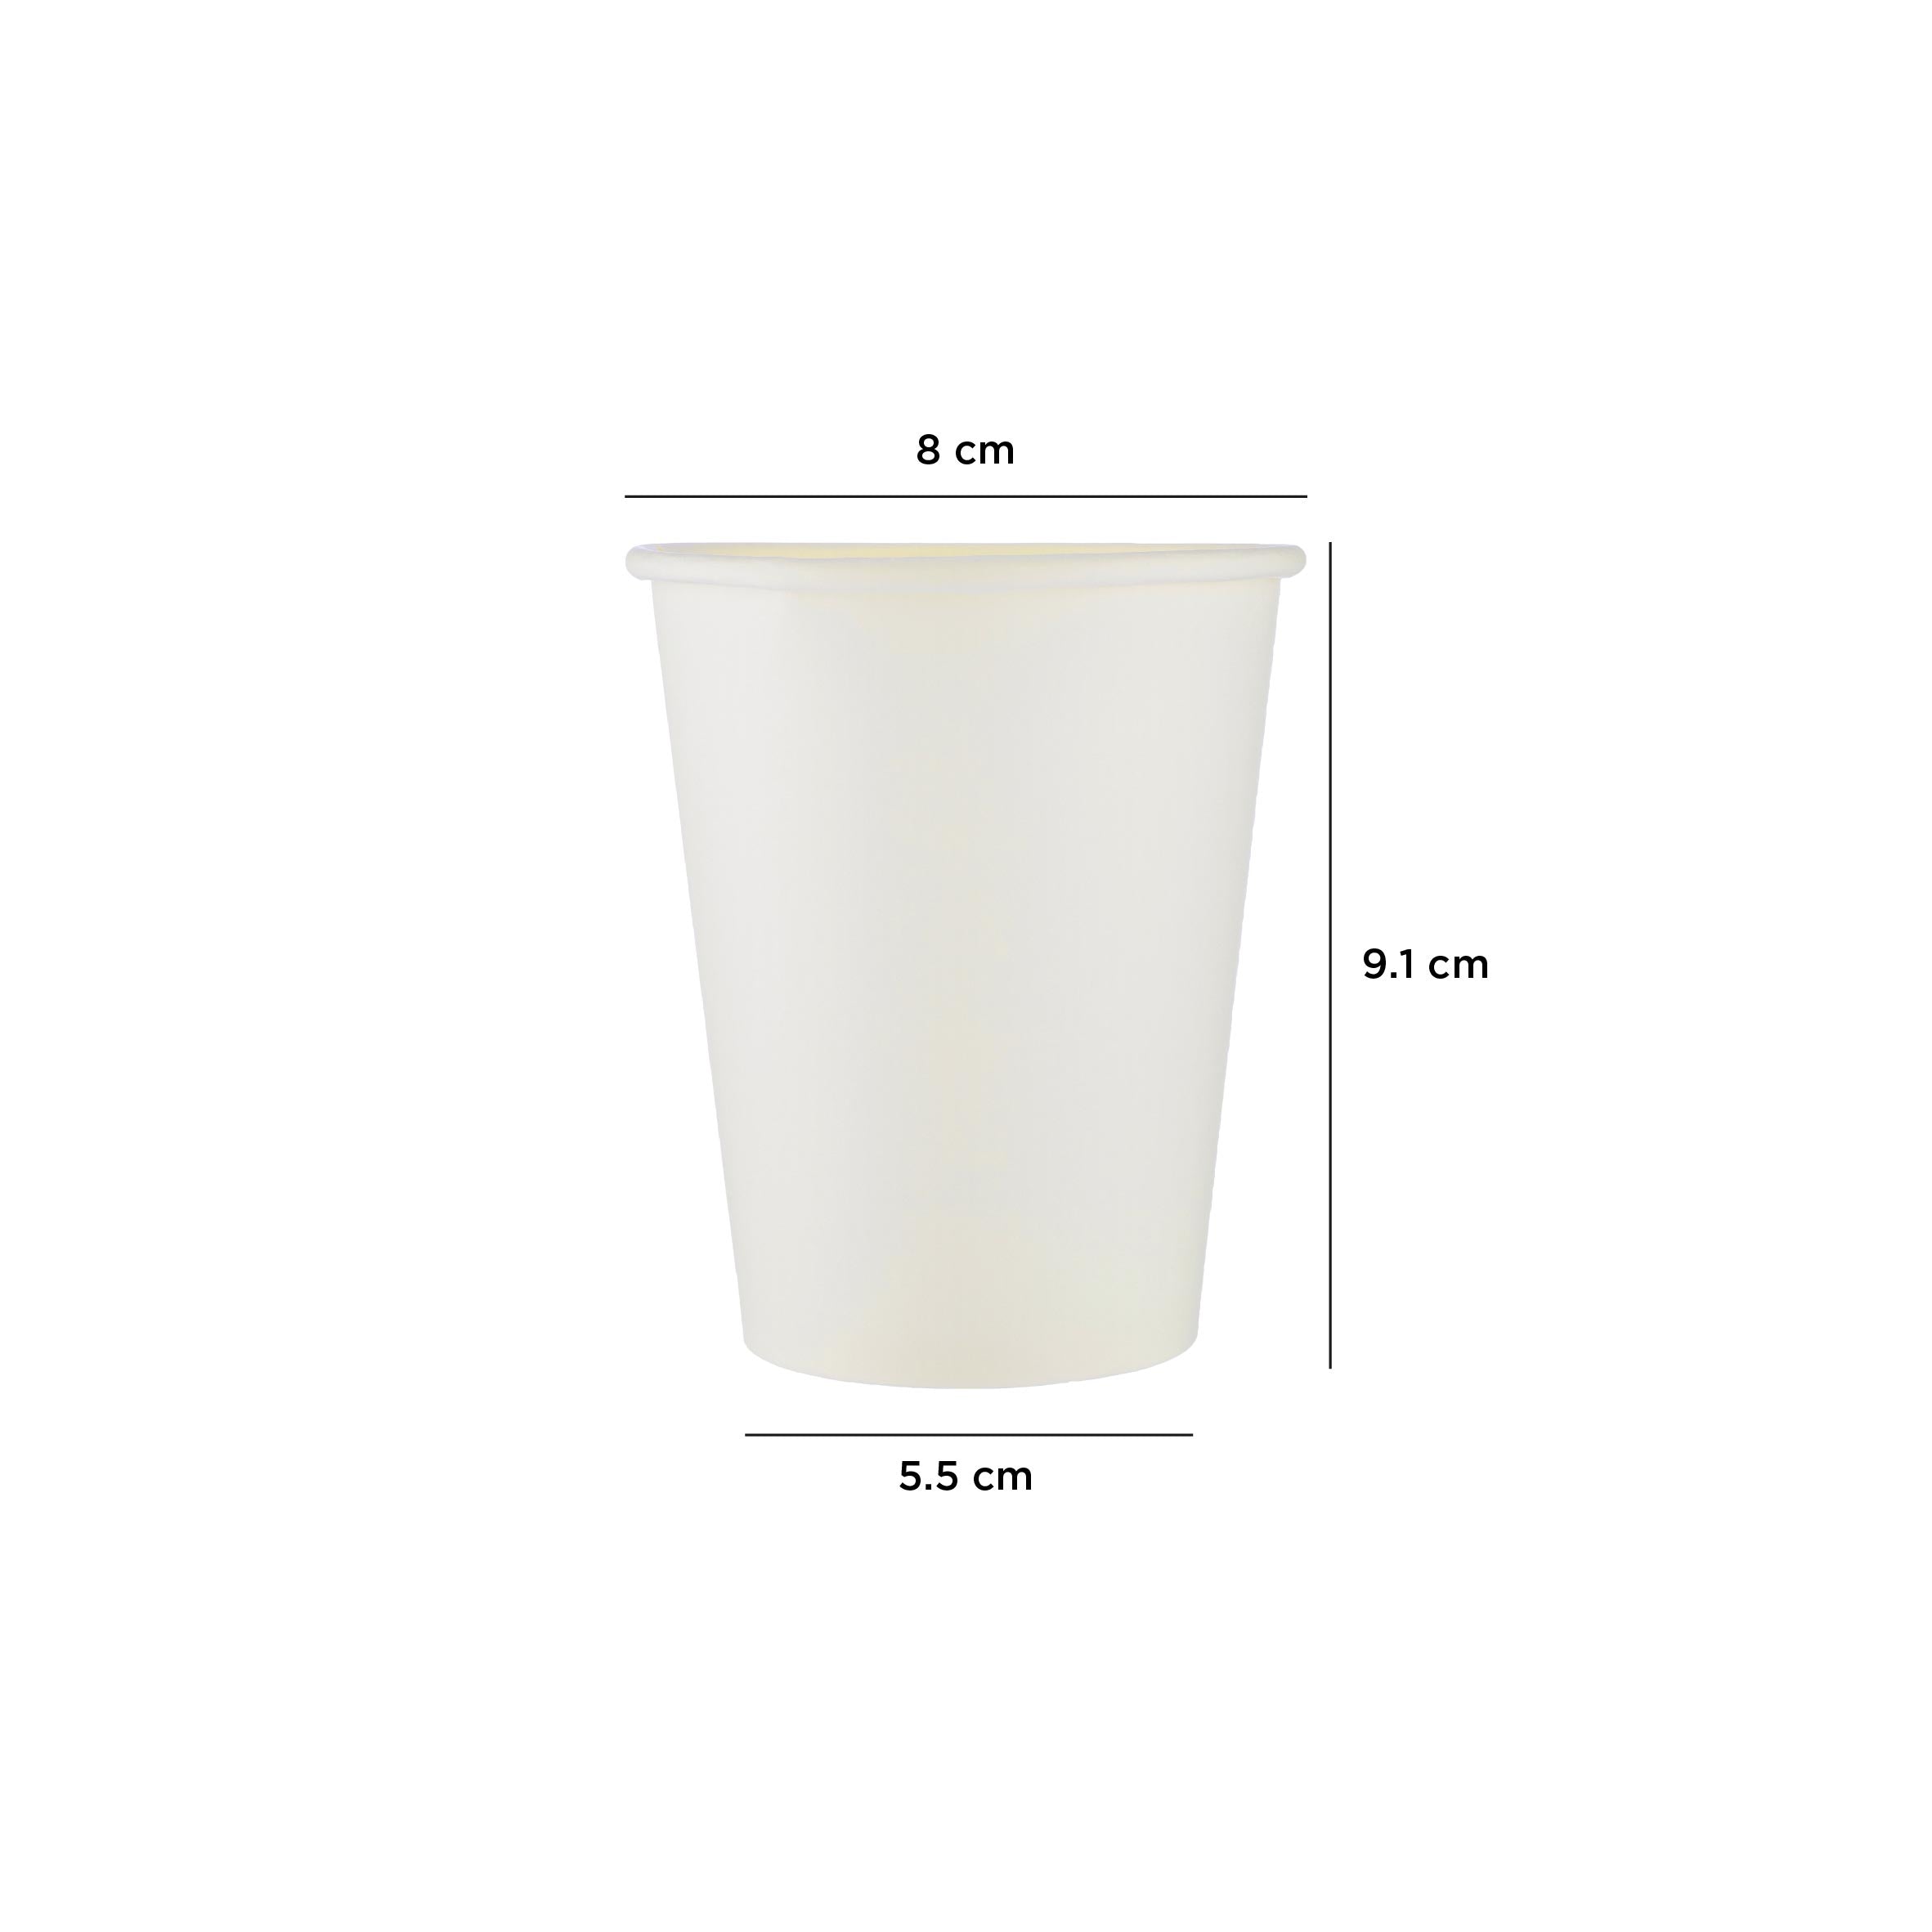 White Single Wall Paper Cup, 8 Oz (236 ml)| 1000 Pieces - Hotpack Bahrain